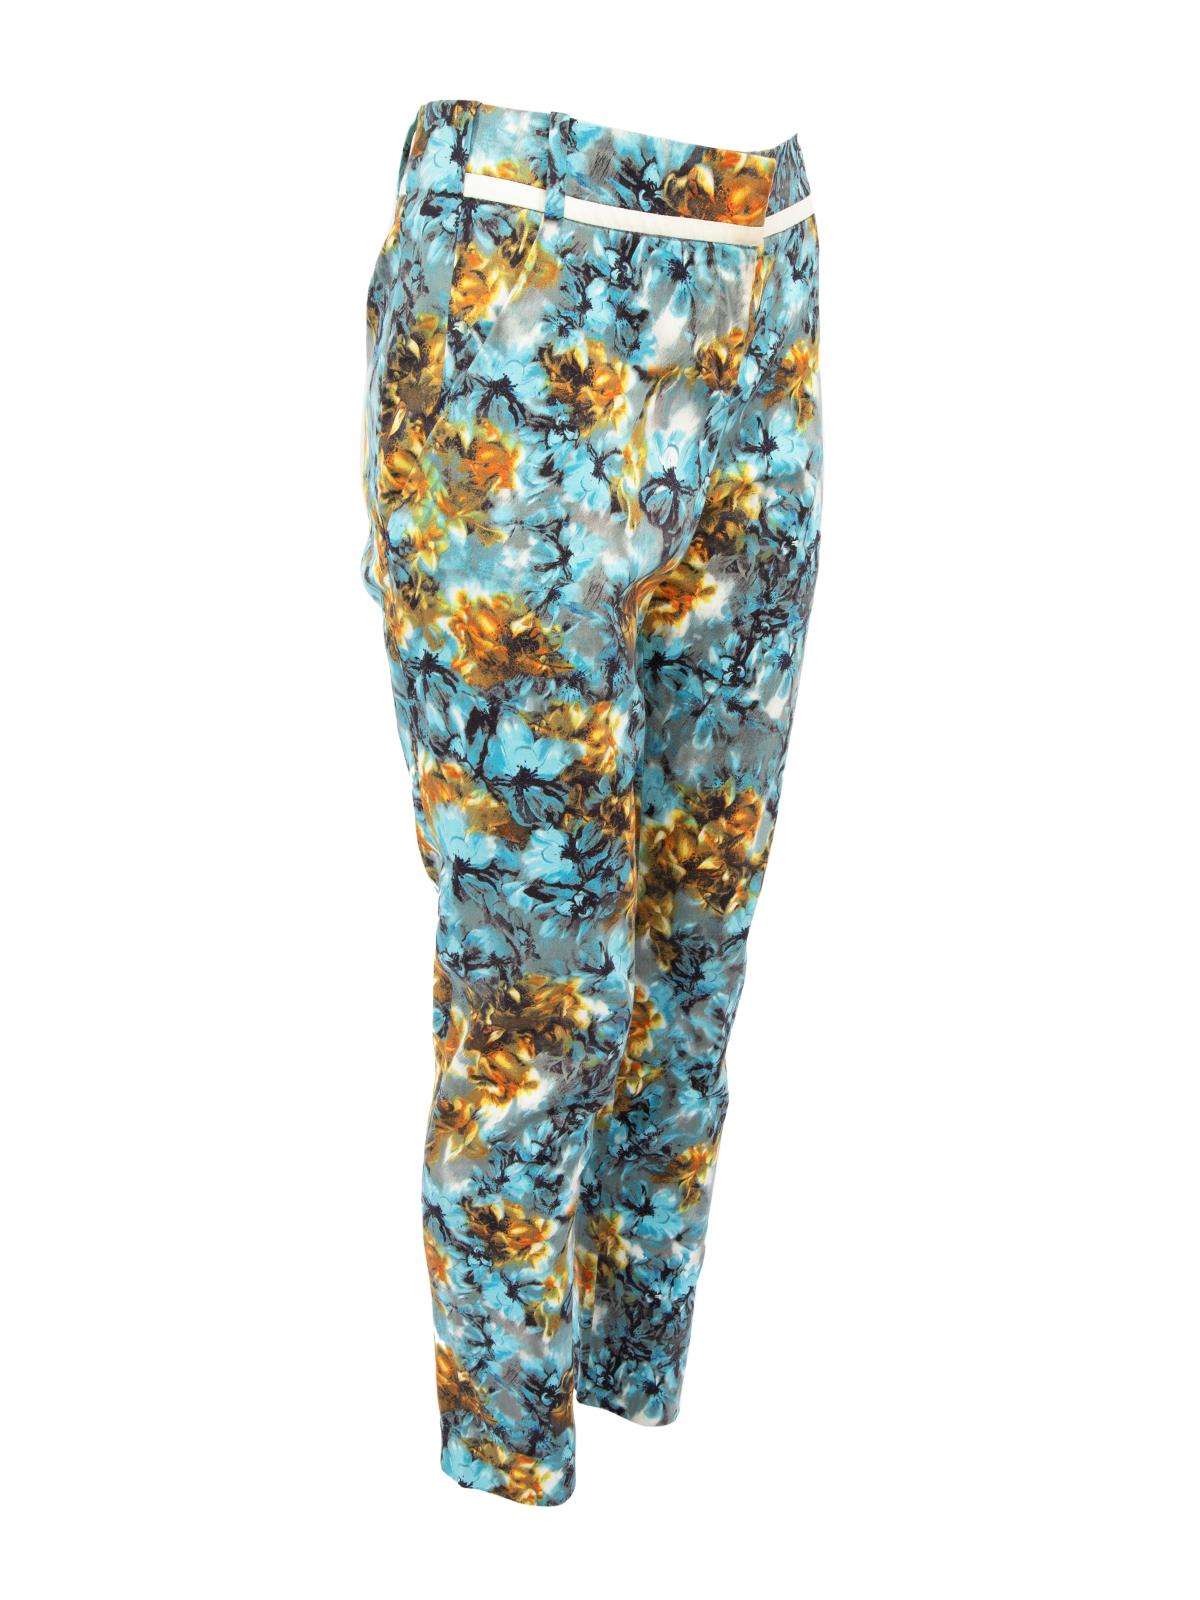 CONDITION is Very good. Minimal wear to trousers is evident. Overall wear to outer fabric on this used Karen Millen designer resale item.   Details  Multicolour  Cotton  Straight leg Floral print  Front pockets Zip fastening   Made in CYPRUS  